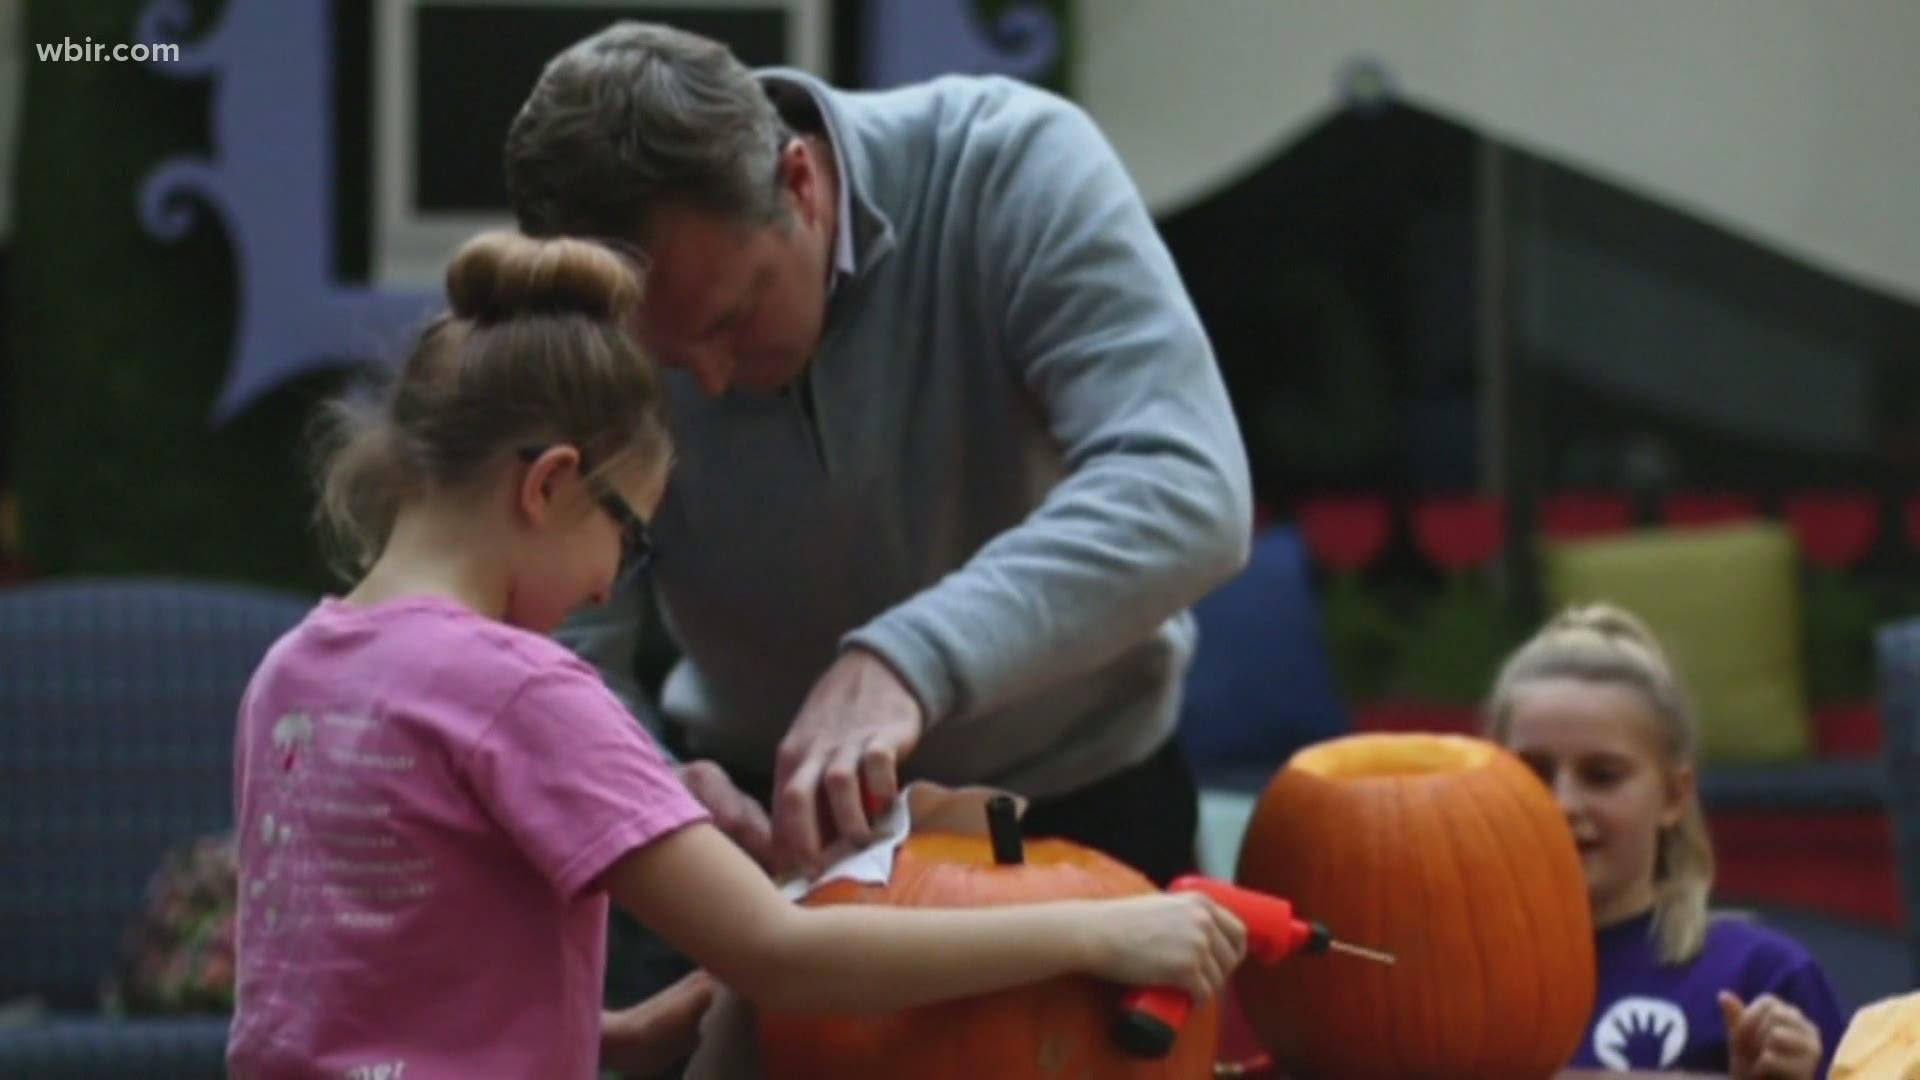 The CDC says some low risk activities could be pumpkin carving or having a virtual costume contest.